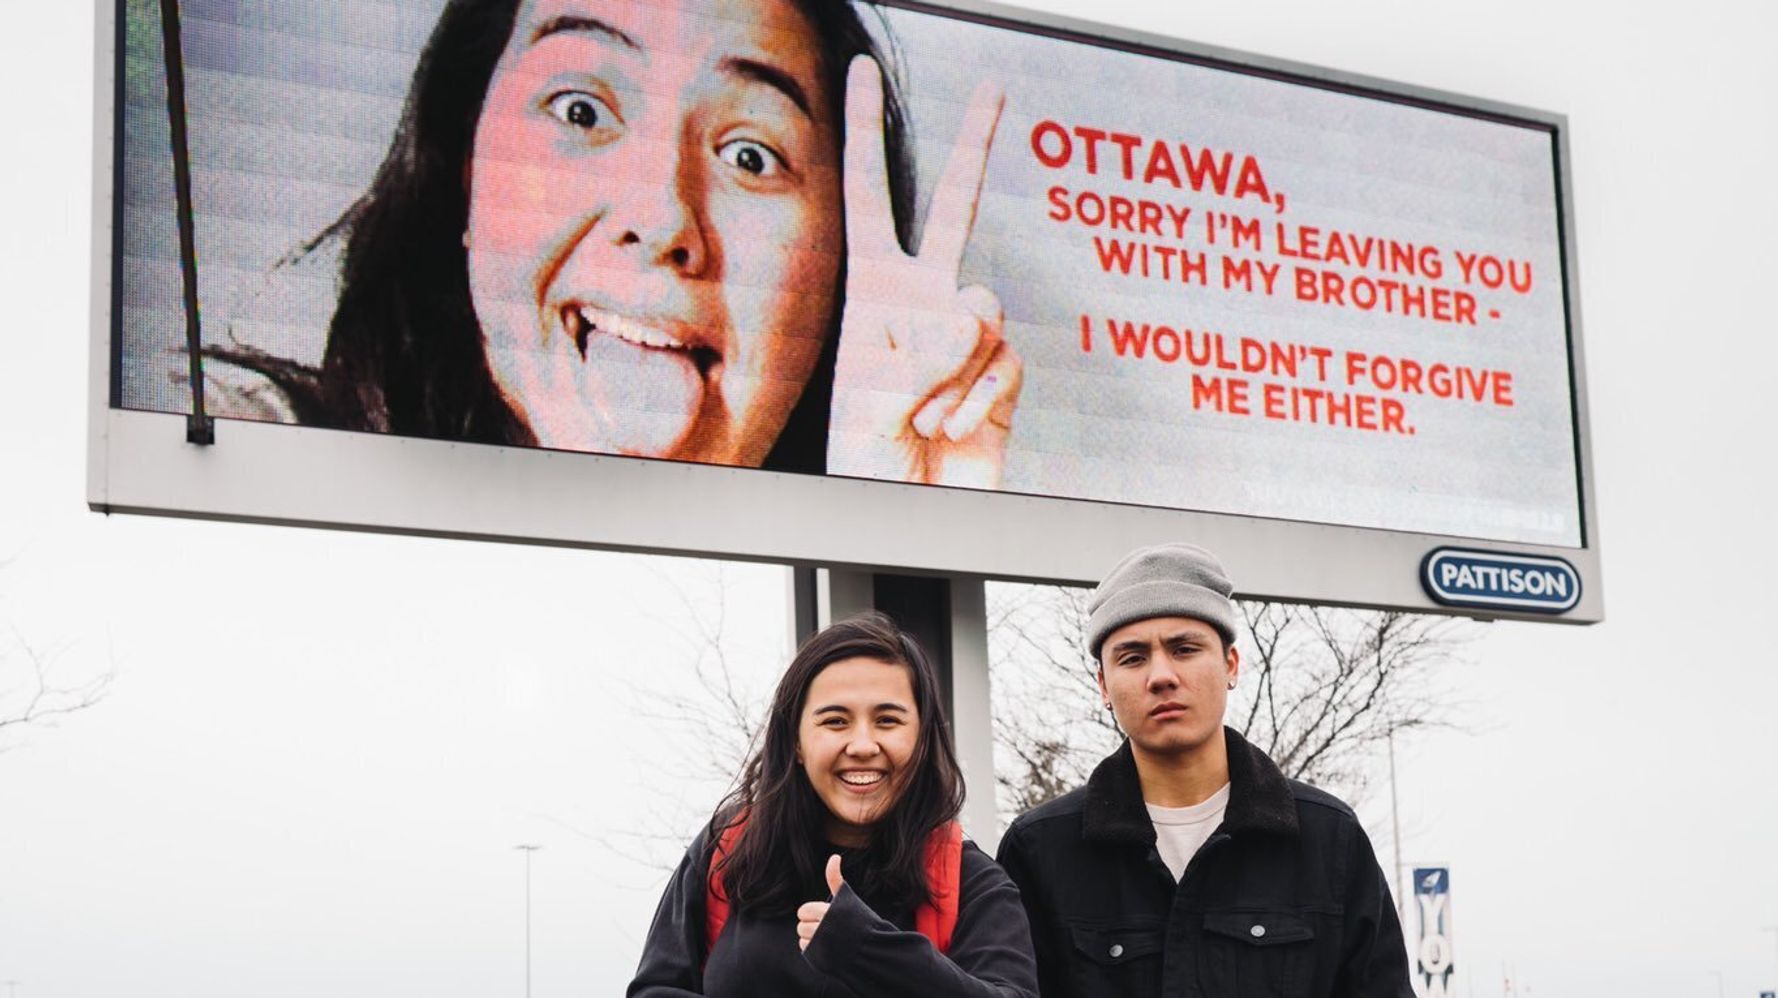 Elle Mills Canadian Youtuber Marks Her Departure From Ottawa With Giant Billboard Huffpost Canada Life